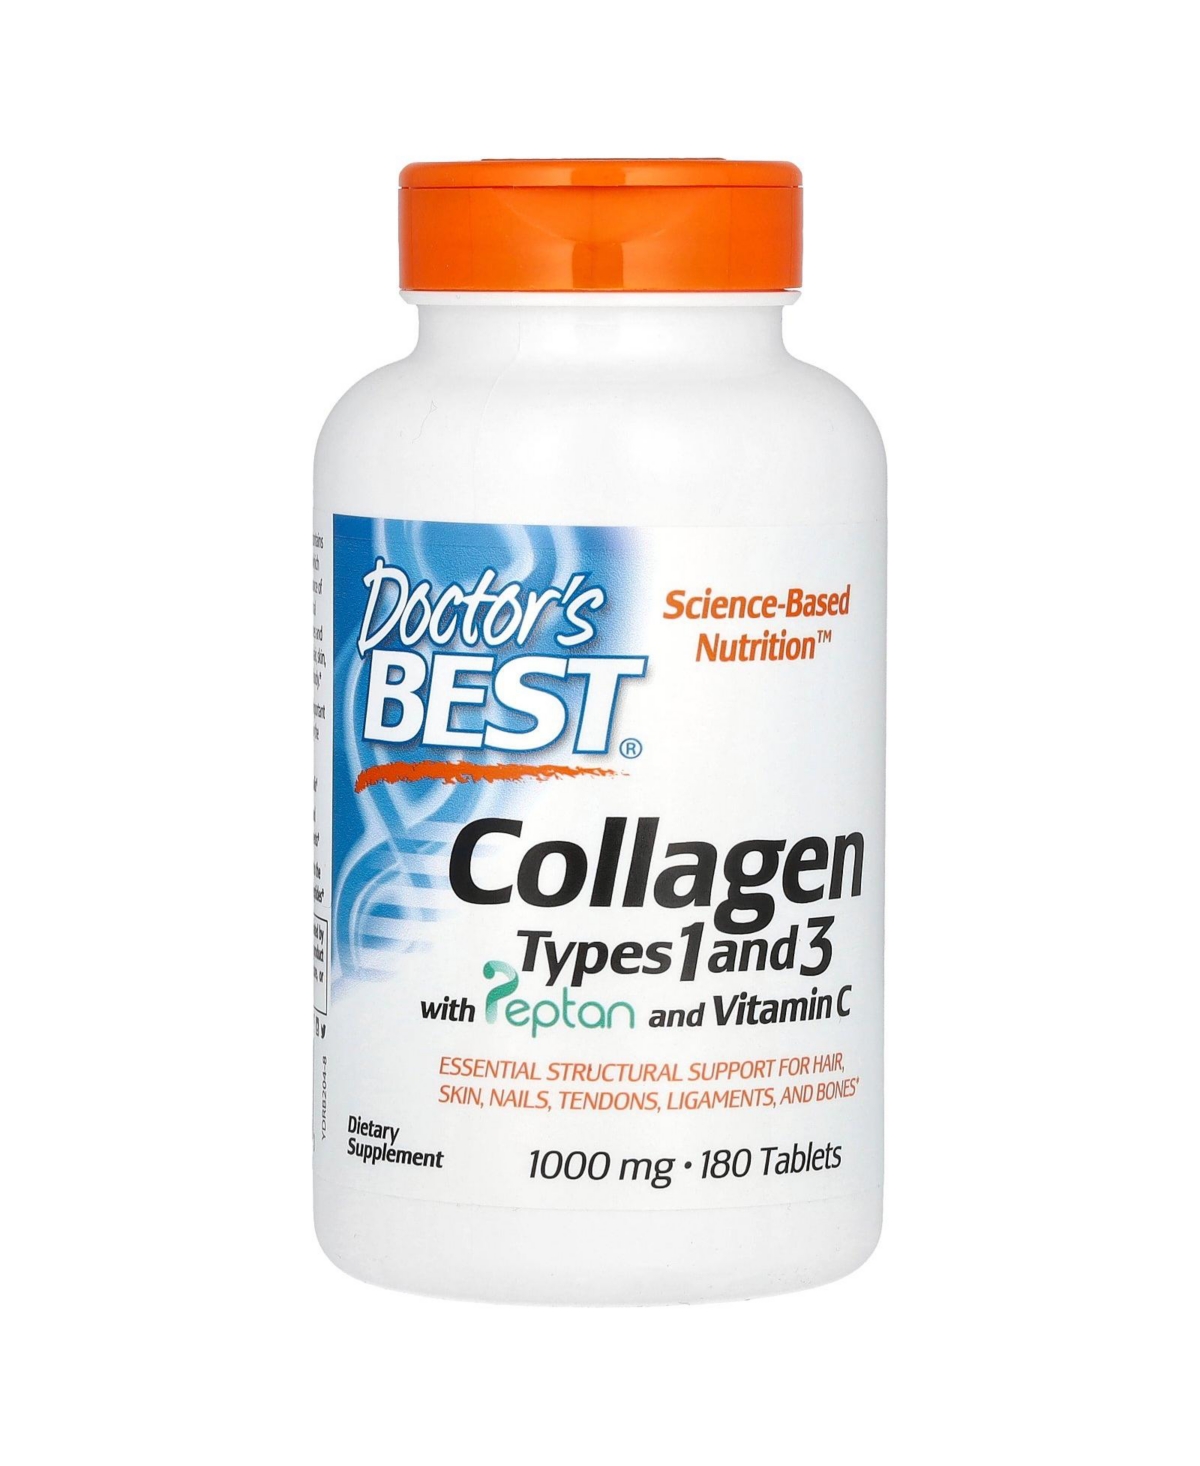 Collagen Types 1 and 3 with Peptan and Vitamin C - 180 Tablets - Assorted Pre-Pack